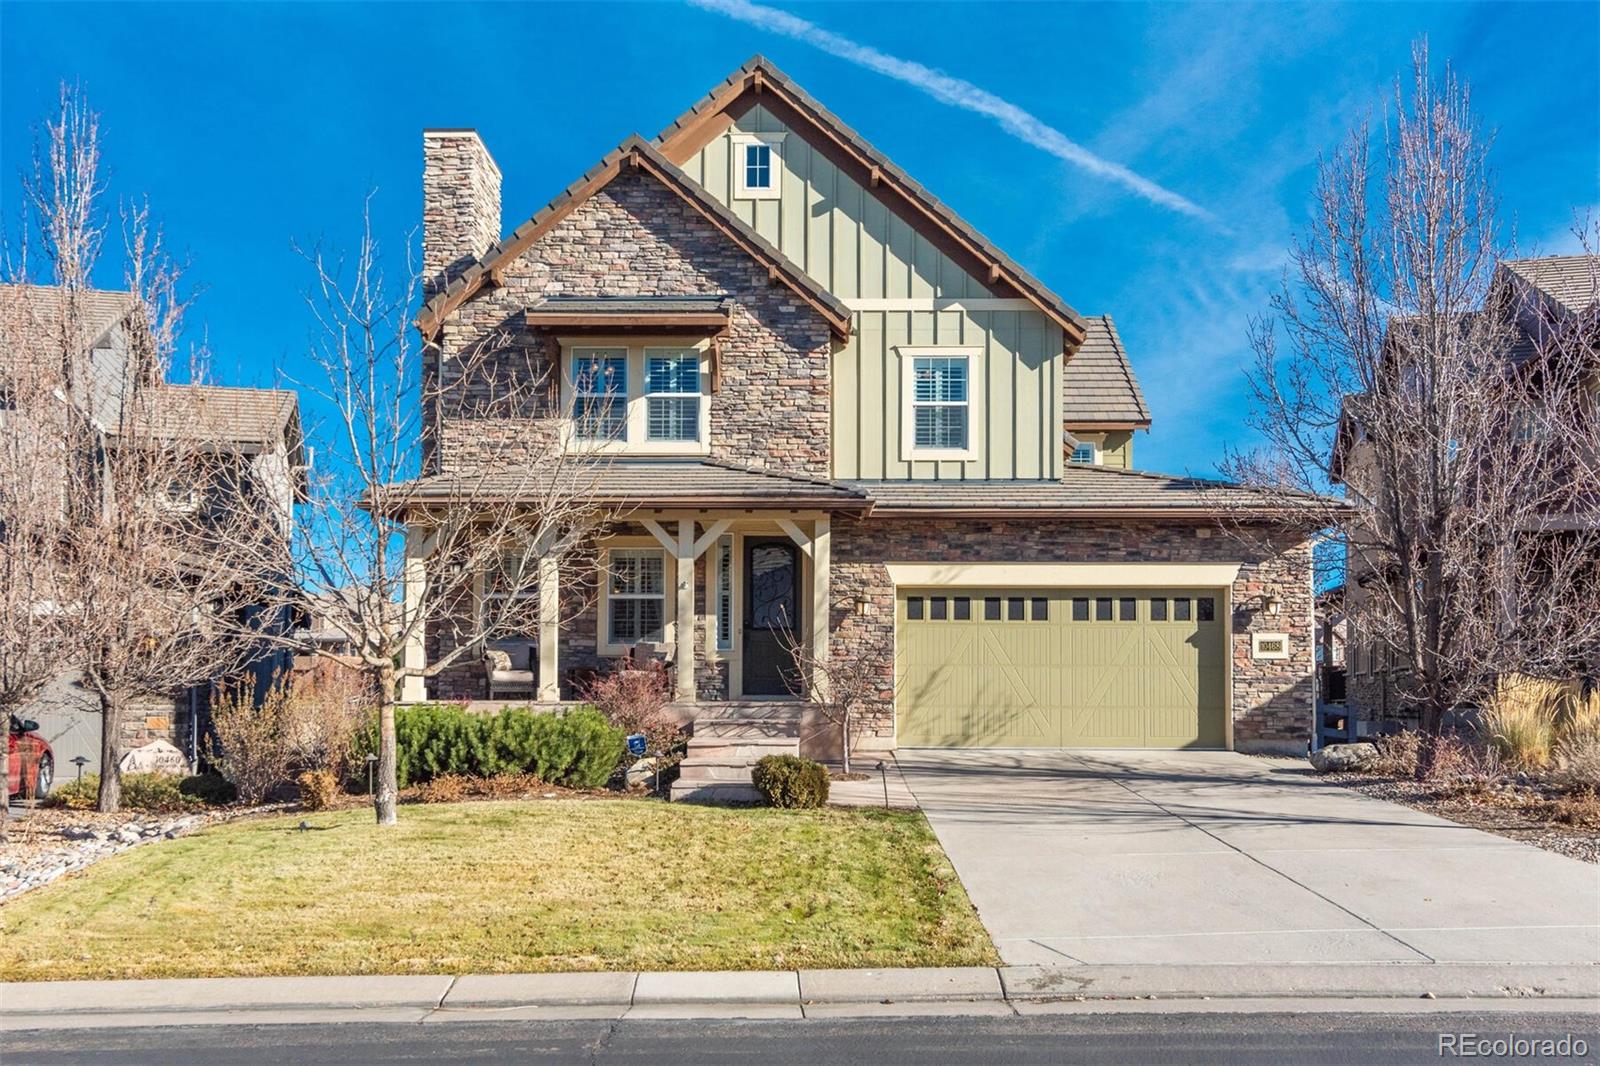 Great street appeal with the stone facade and the charming covered front patio makes a great entrance with flagstone steps up to the front door.